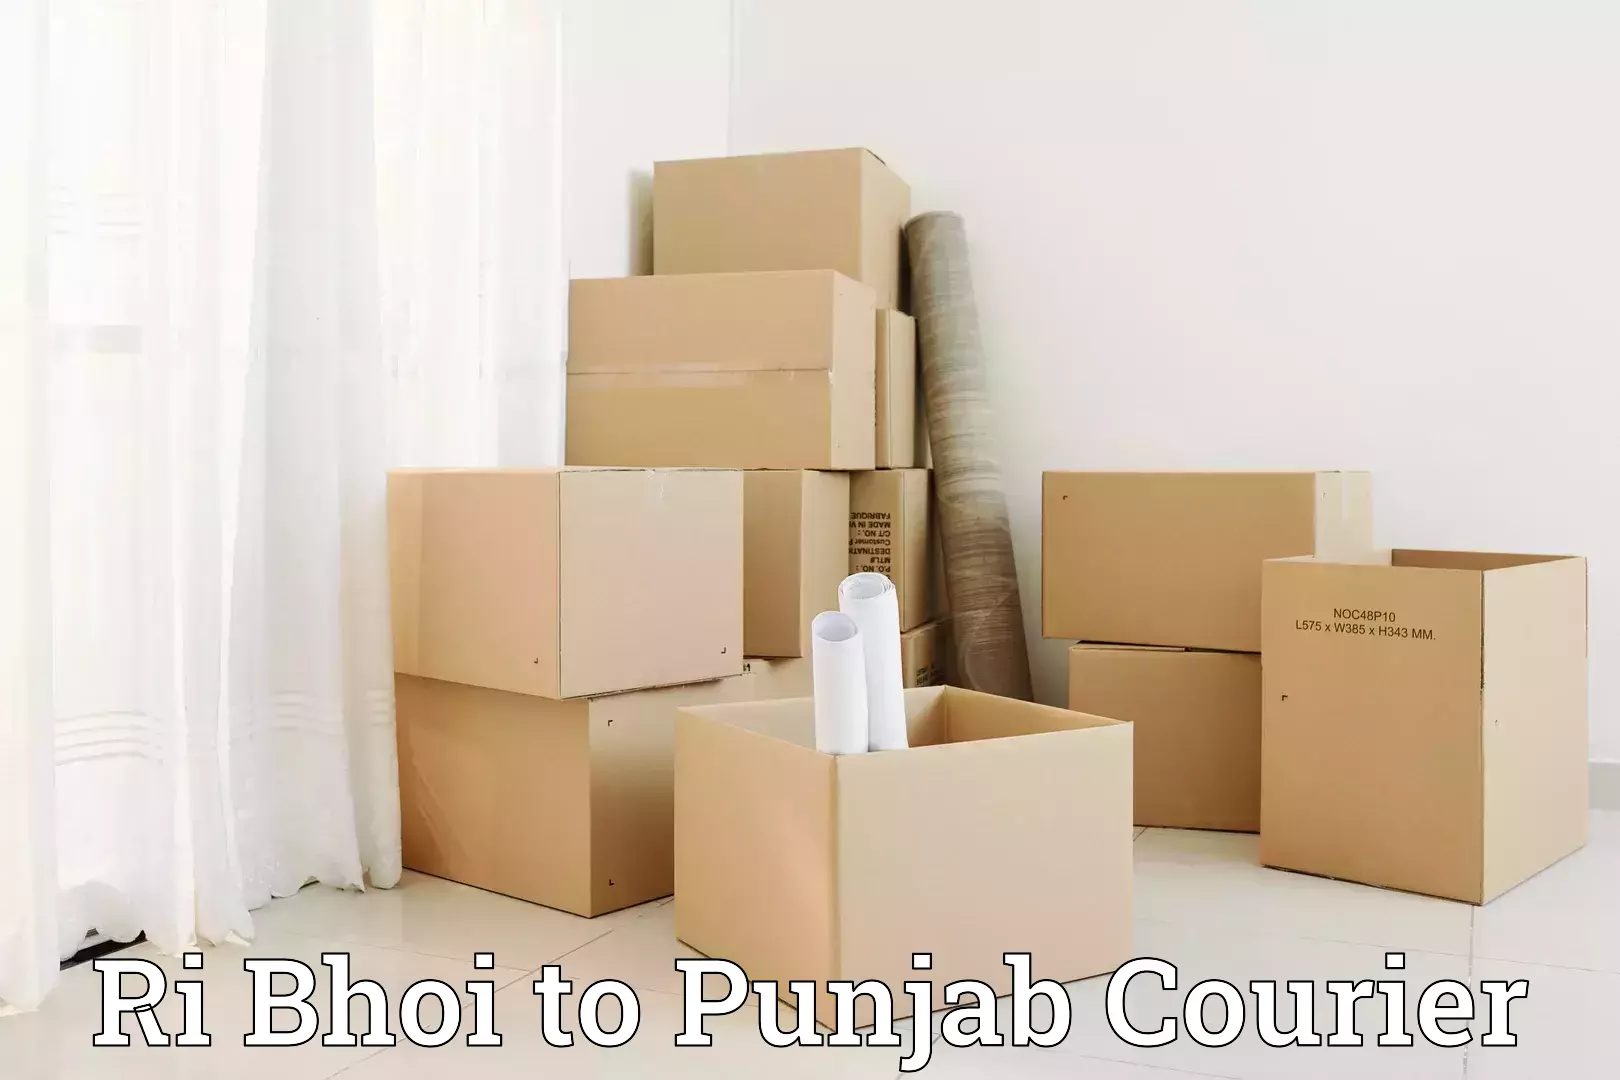 Professional relocation services Ri Bhoi to Patiala